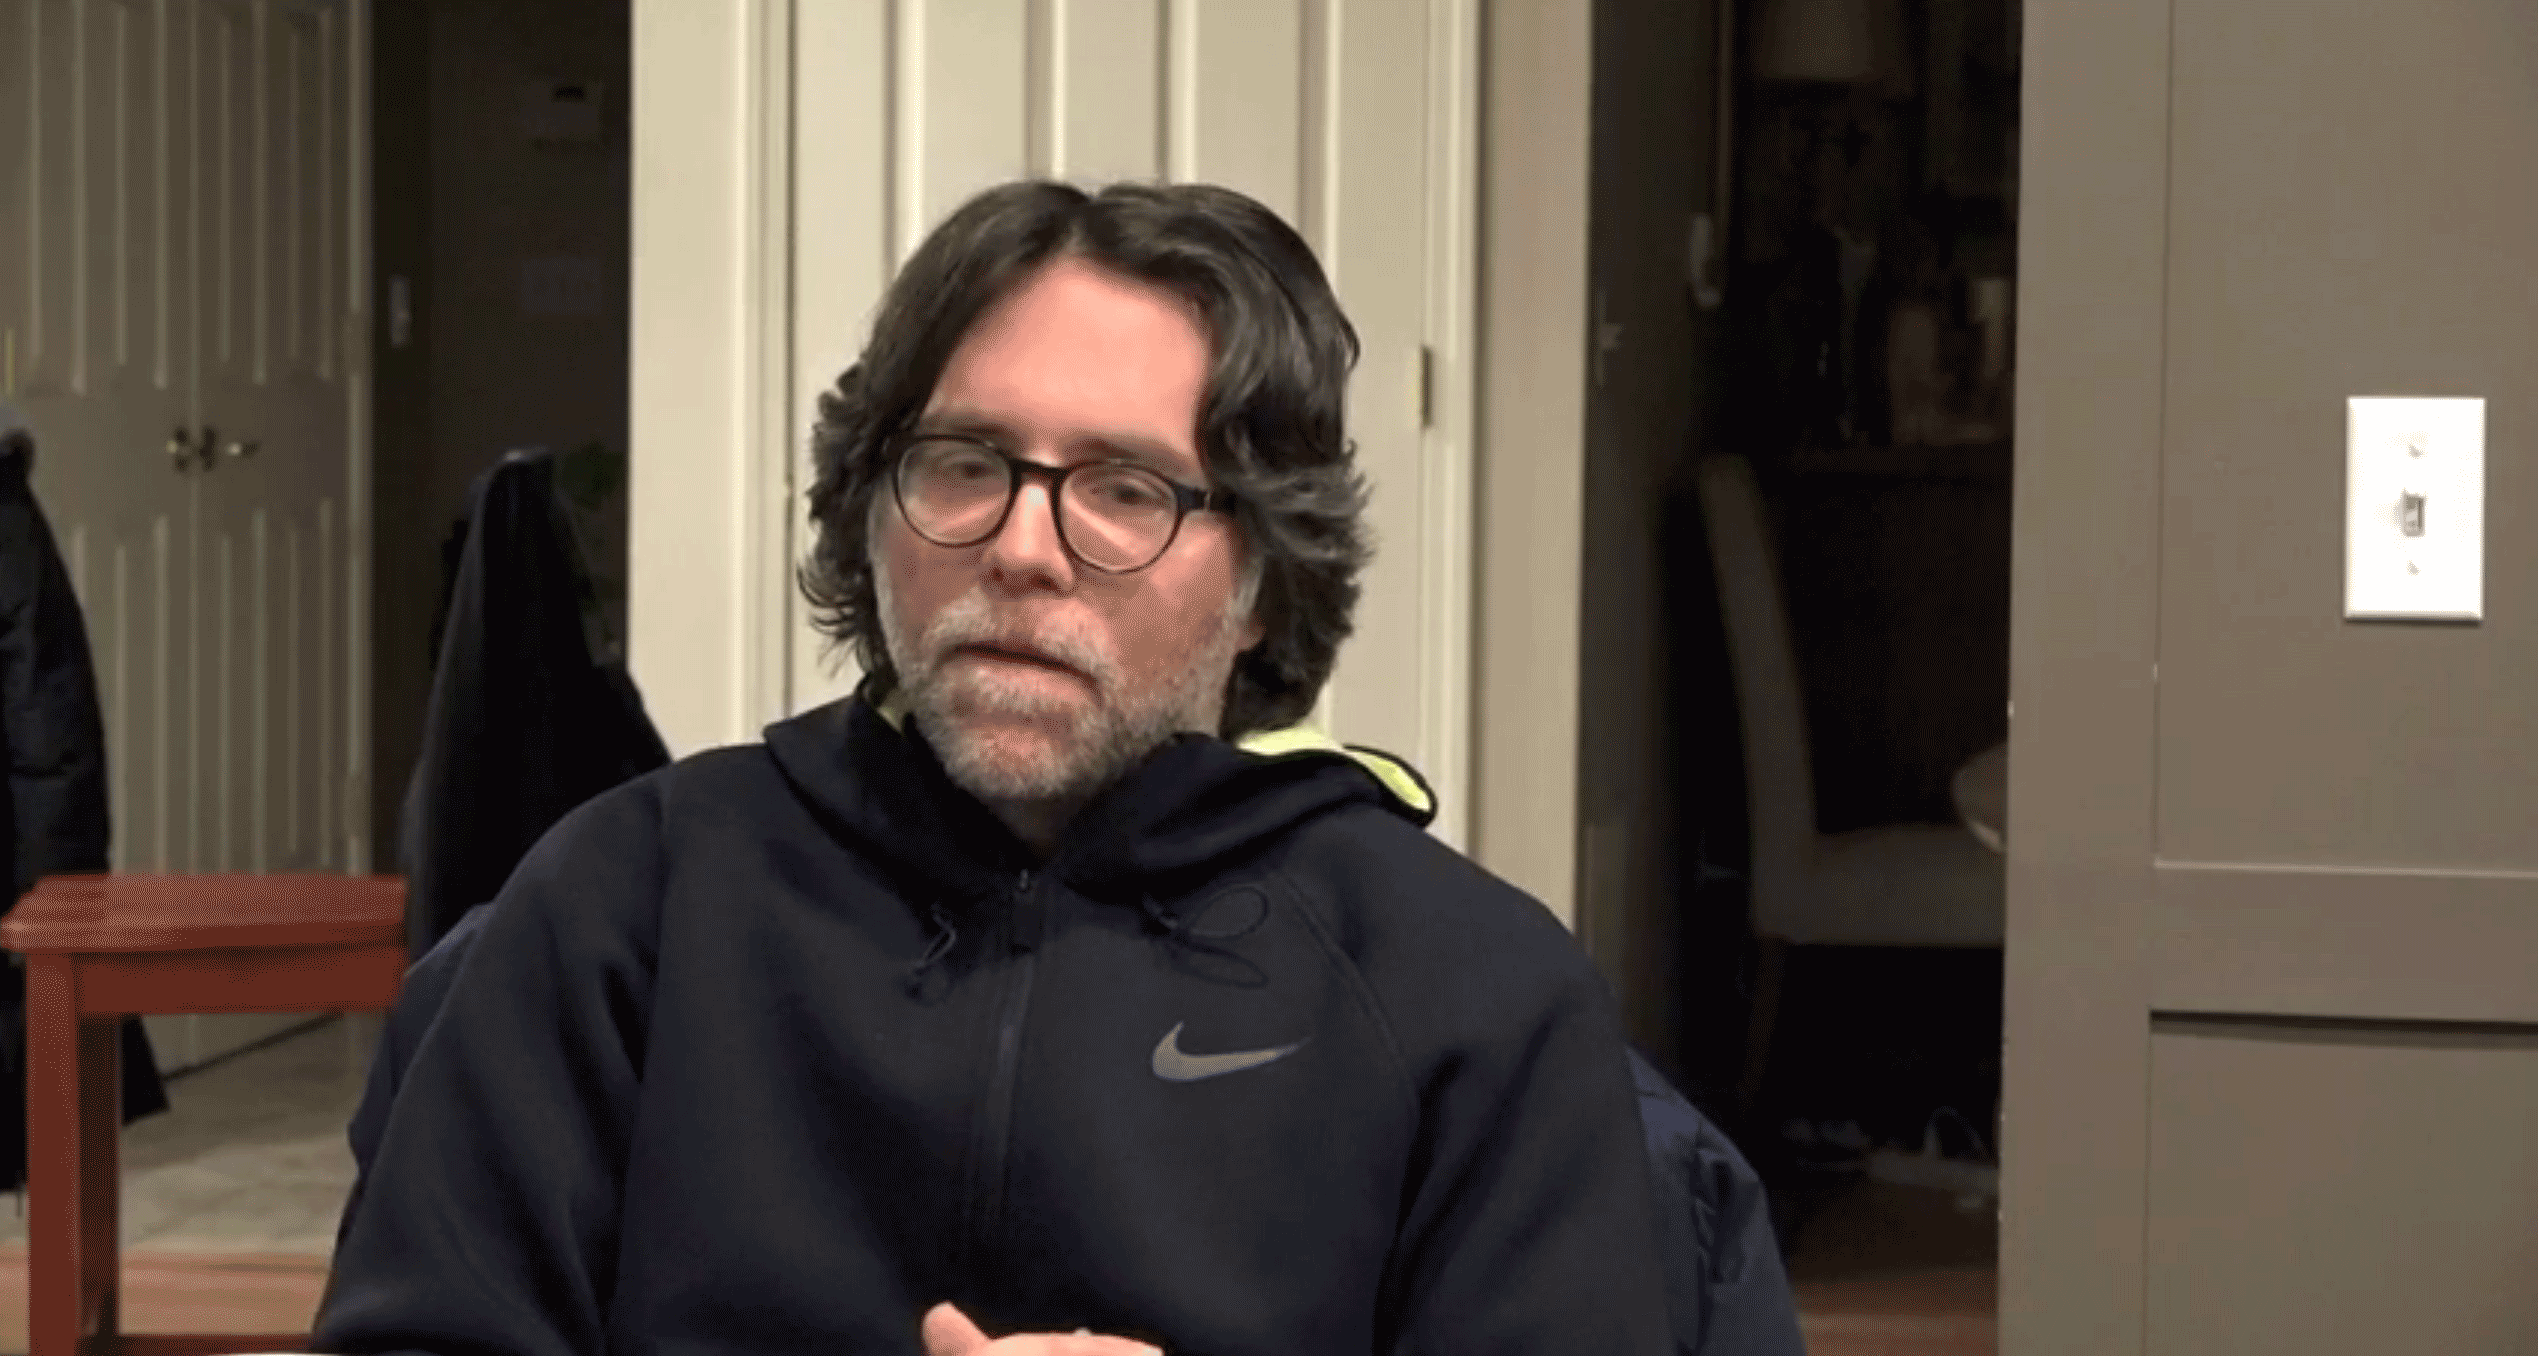 Nxivm Leader Keith Raniere Sentenced To Life In Prison For Sex